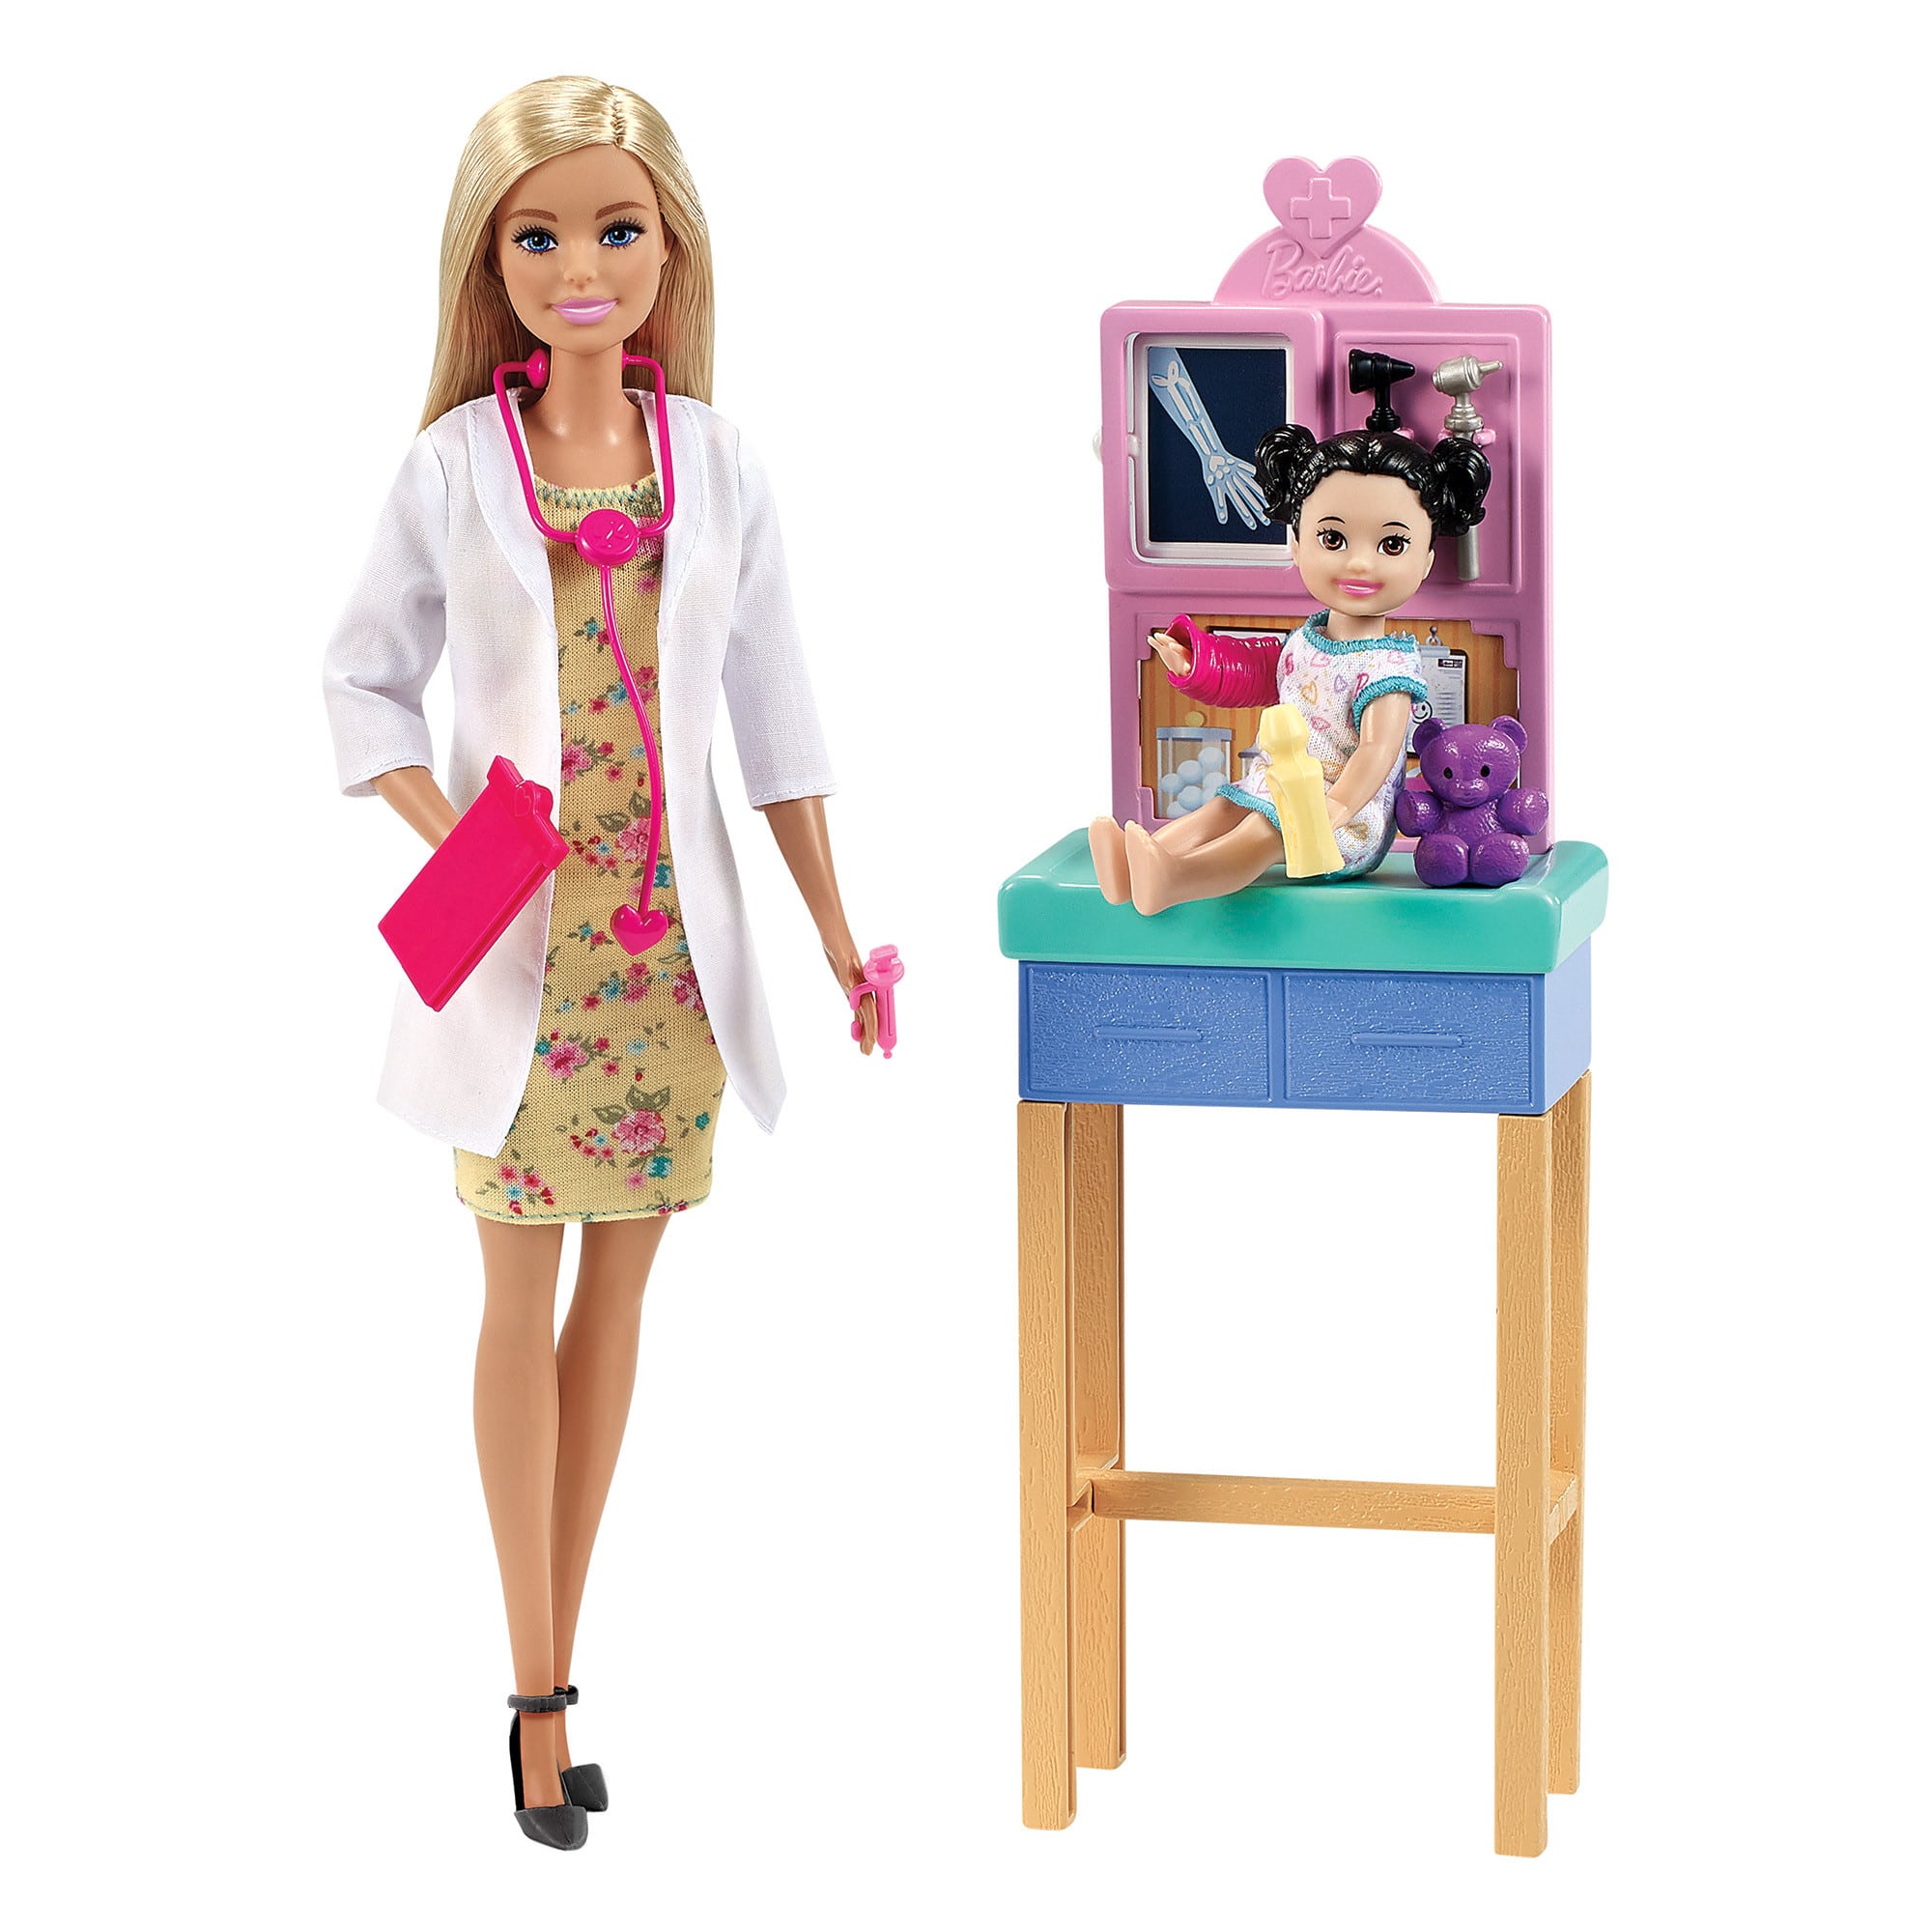 Barbie - You Can Be Anything Playset - Blonde Pediatrician